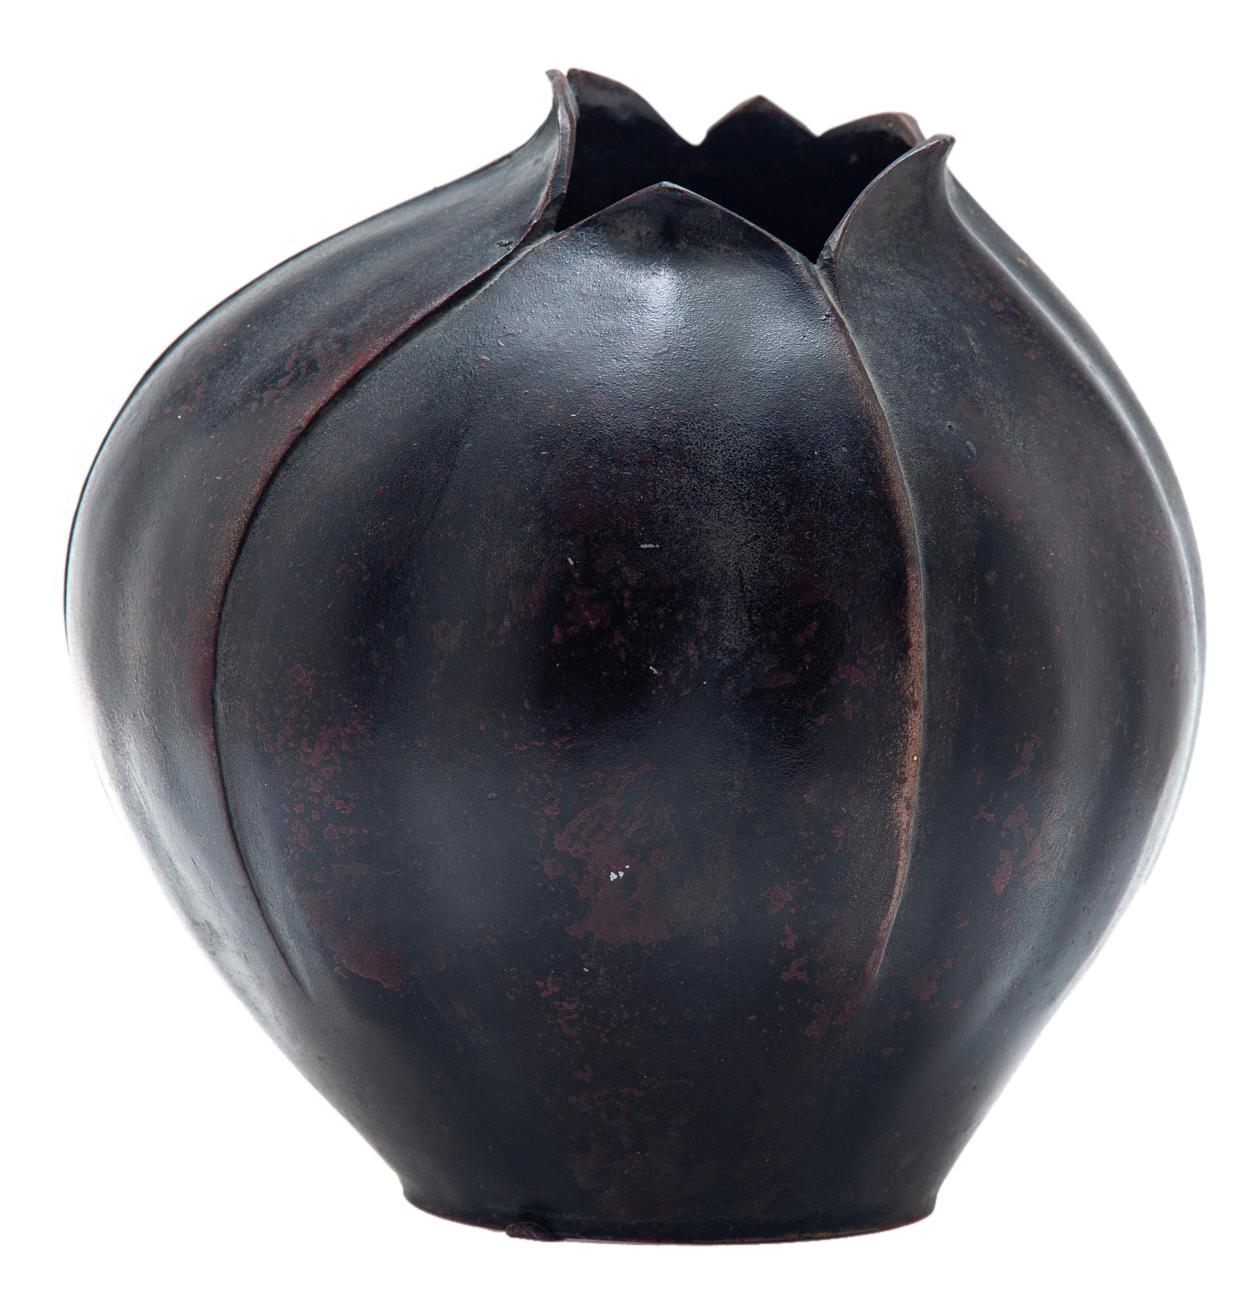 An elegant vase, organic impression of a lotus bud. The bronze reveals a deep earthy background with highlights on the leaf edges. The rubbed surface displays a reddish textured surface.
In Japanese culture, the lotus flower is revered for its